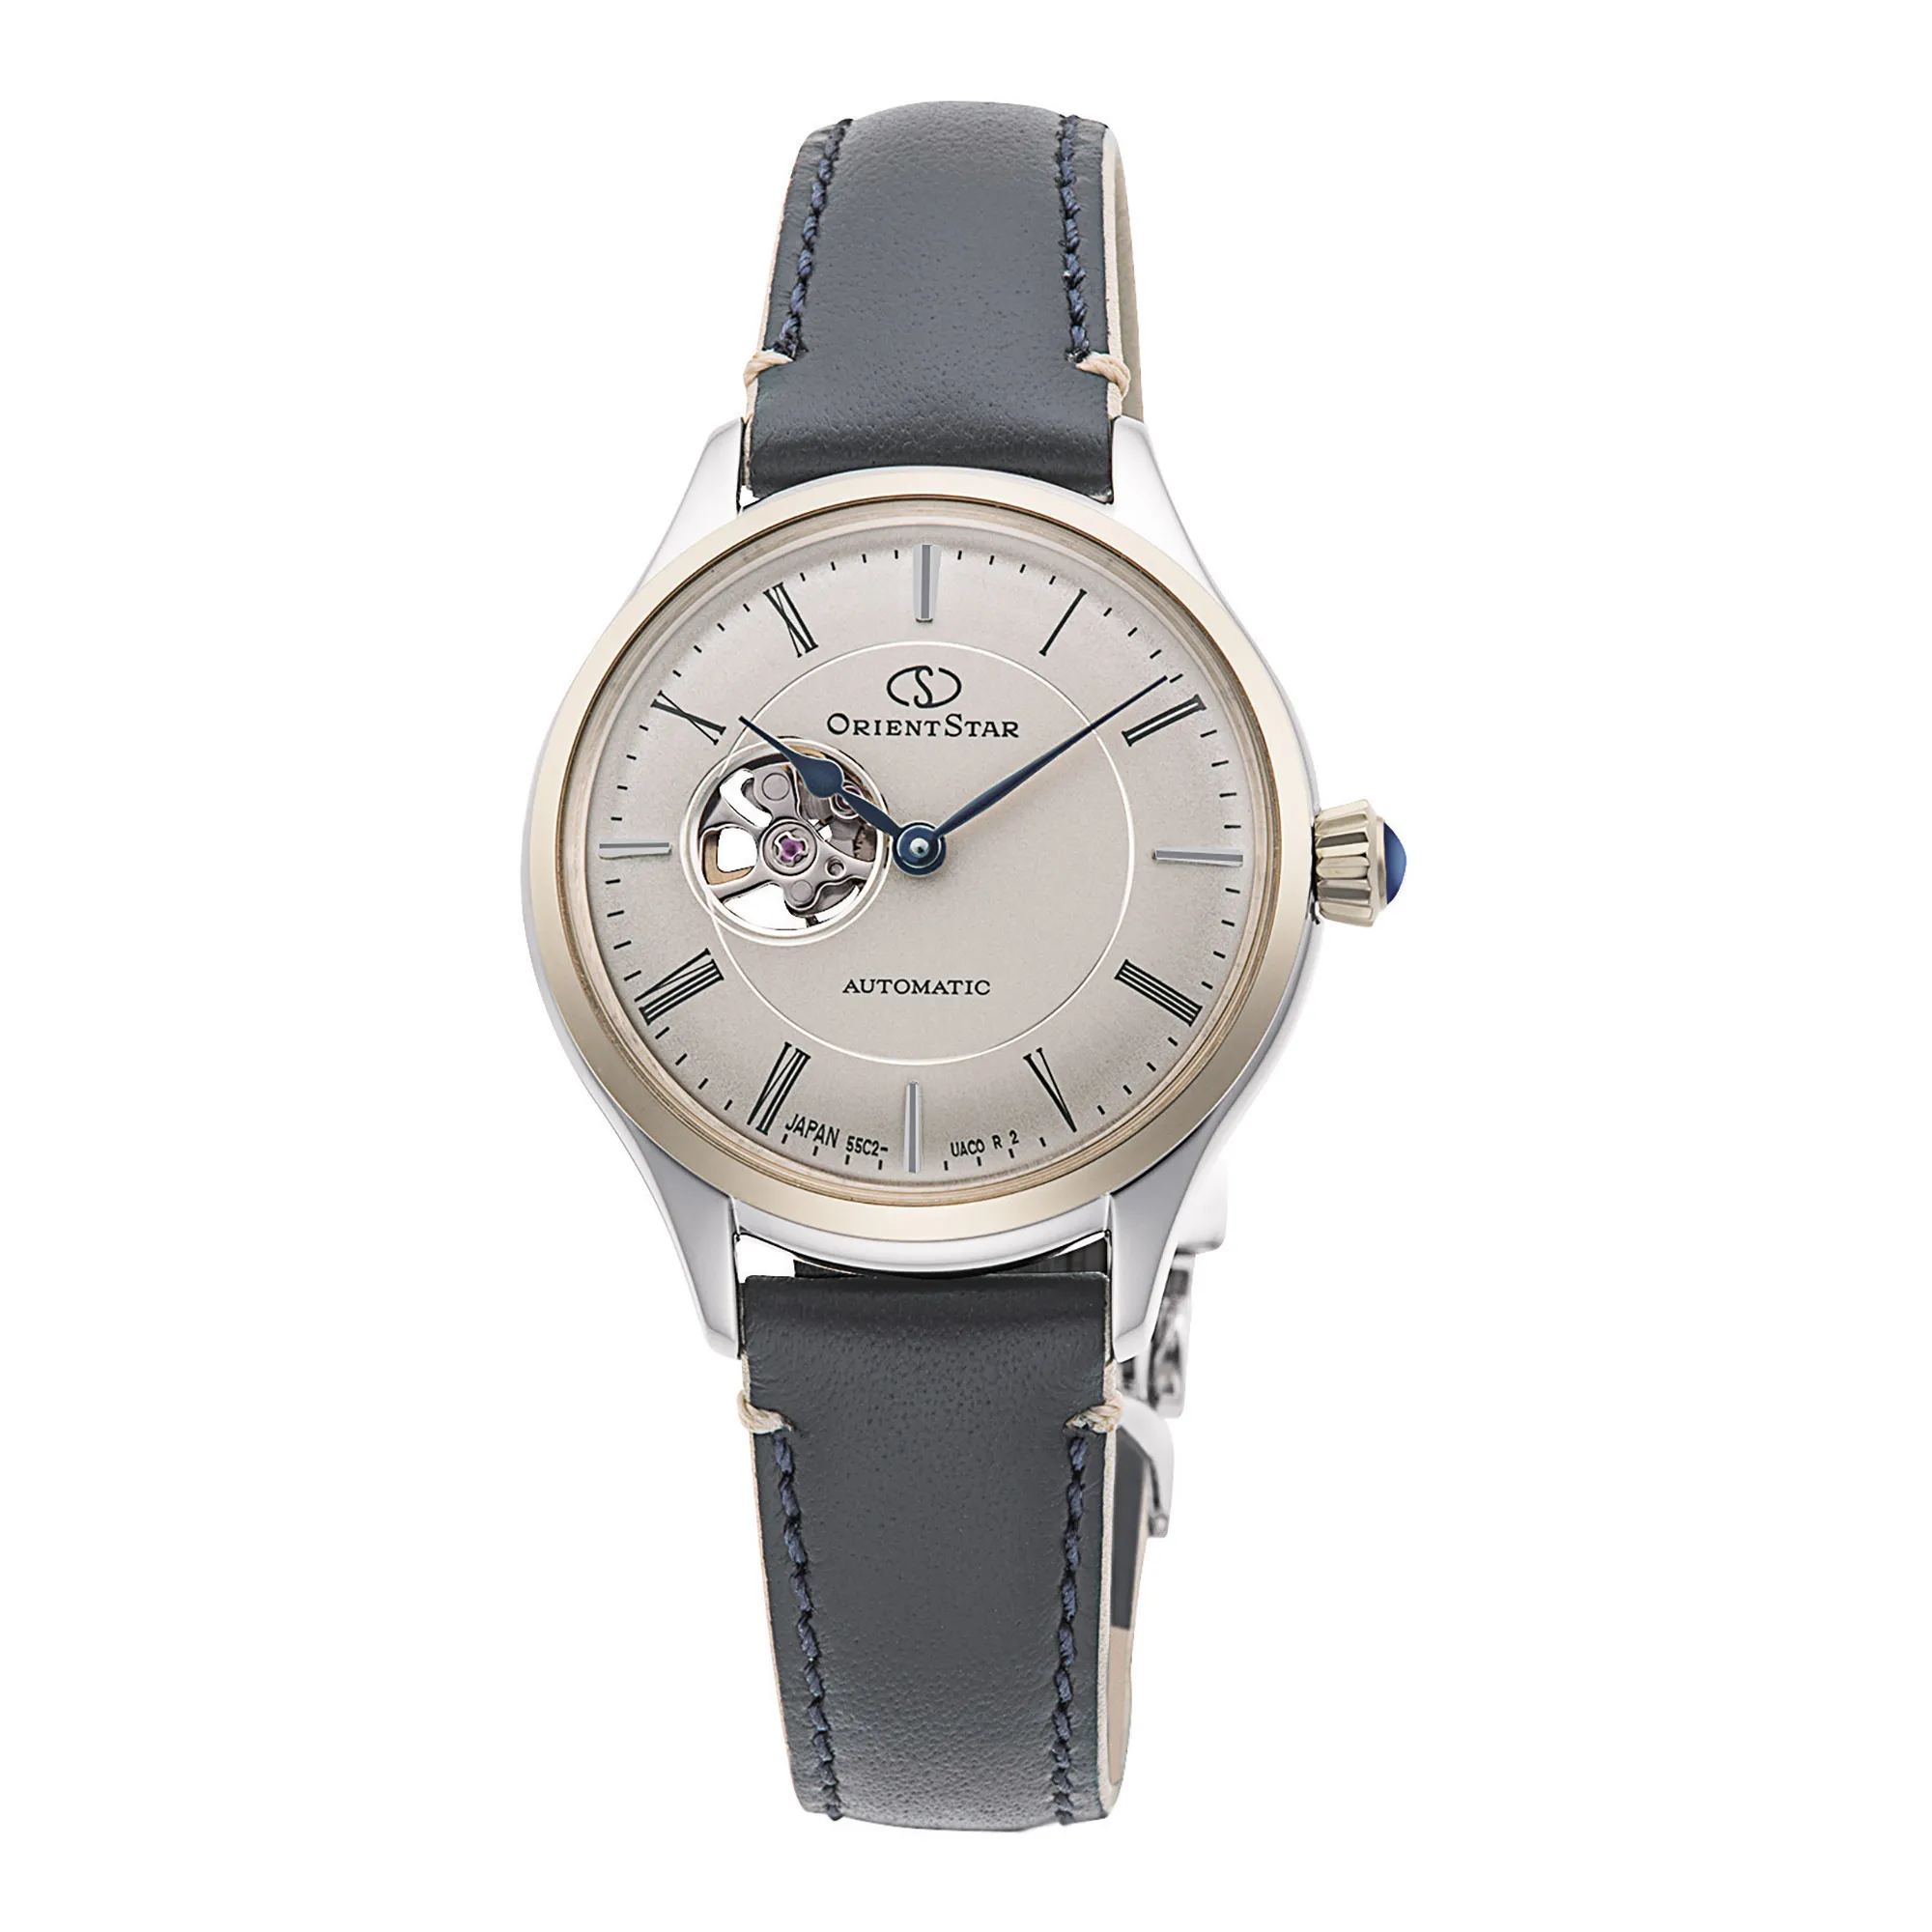 Orologio ORIENT STAR Classic re-nd0011n00b